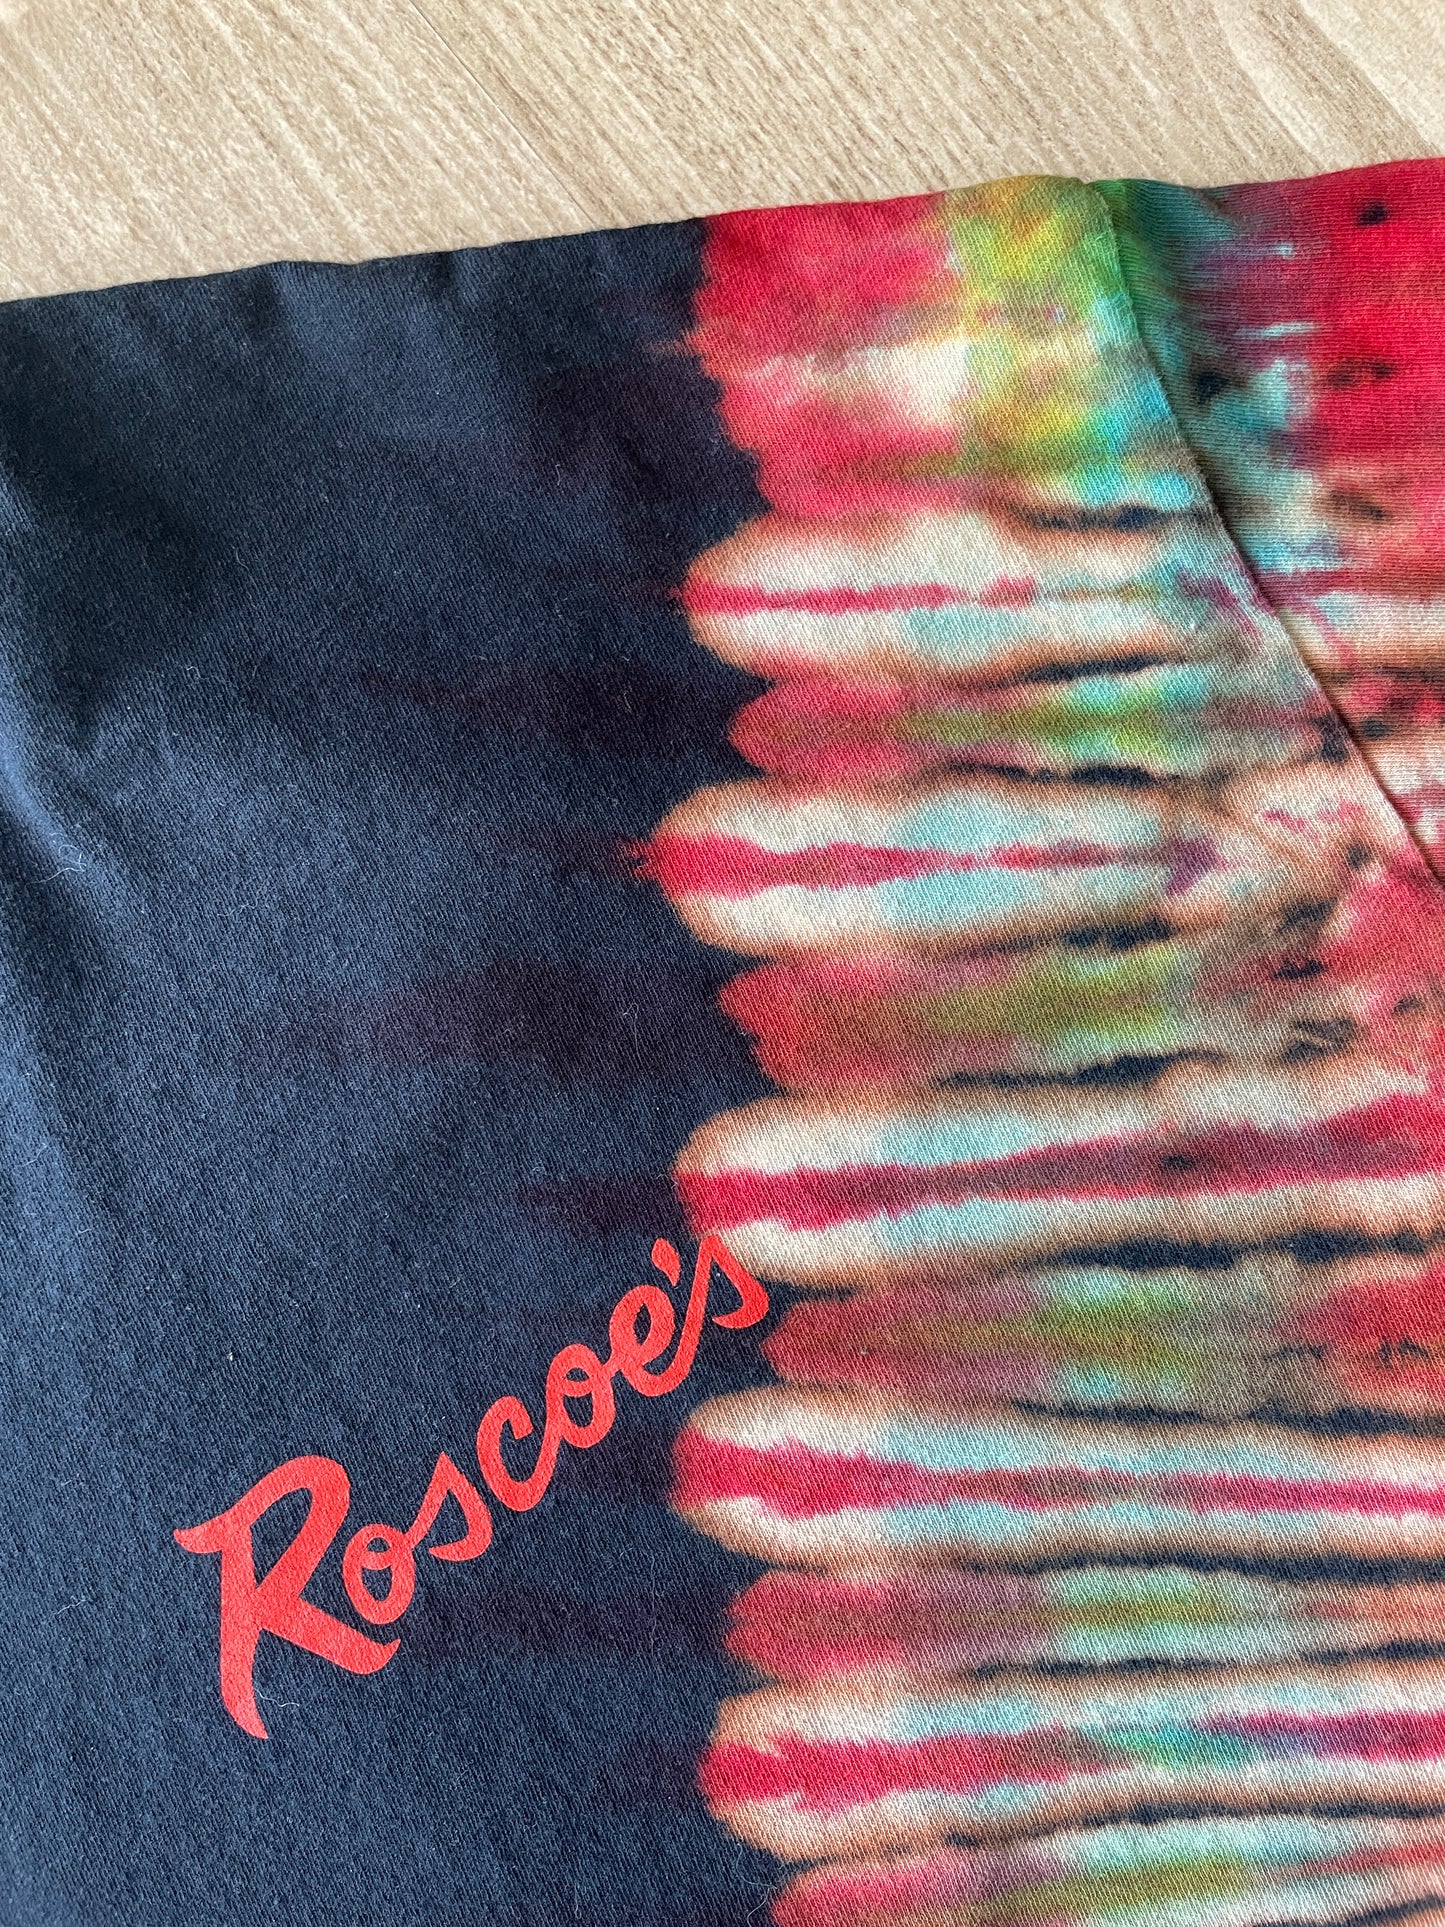 XL Men’s Roscoe's Chicken n Waffles Handmade Reverse Tie Dye T-Shirt | One-Of-a-Kind Black, Red, and Blue Short Sleeve